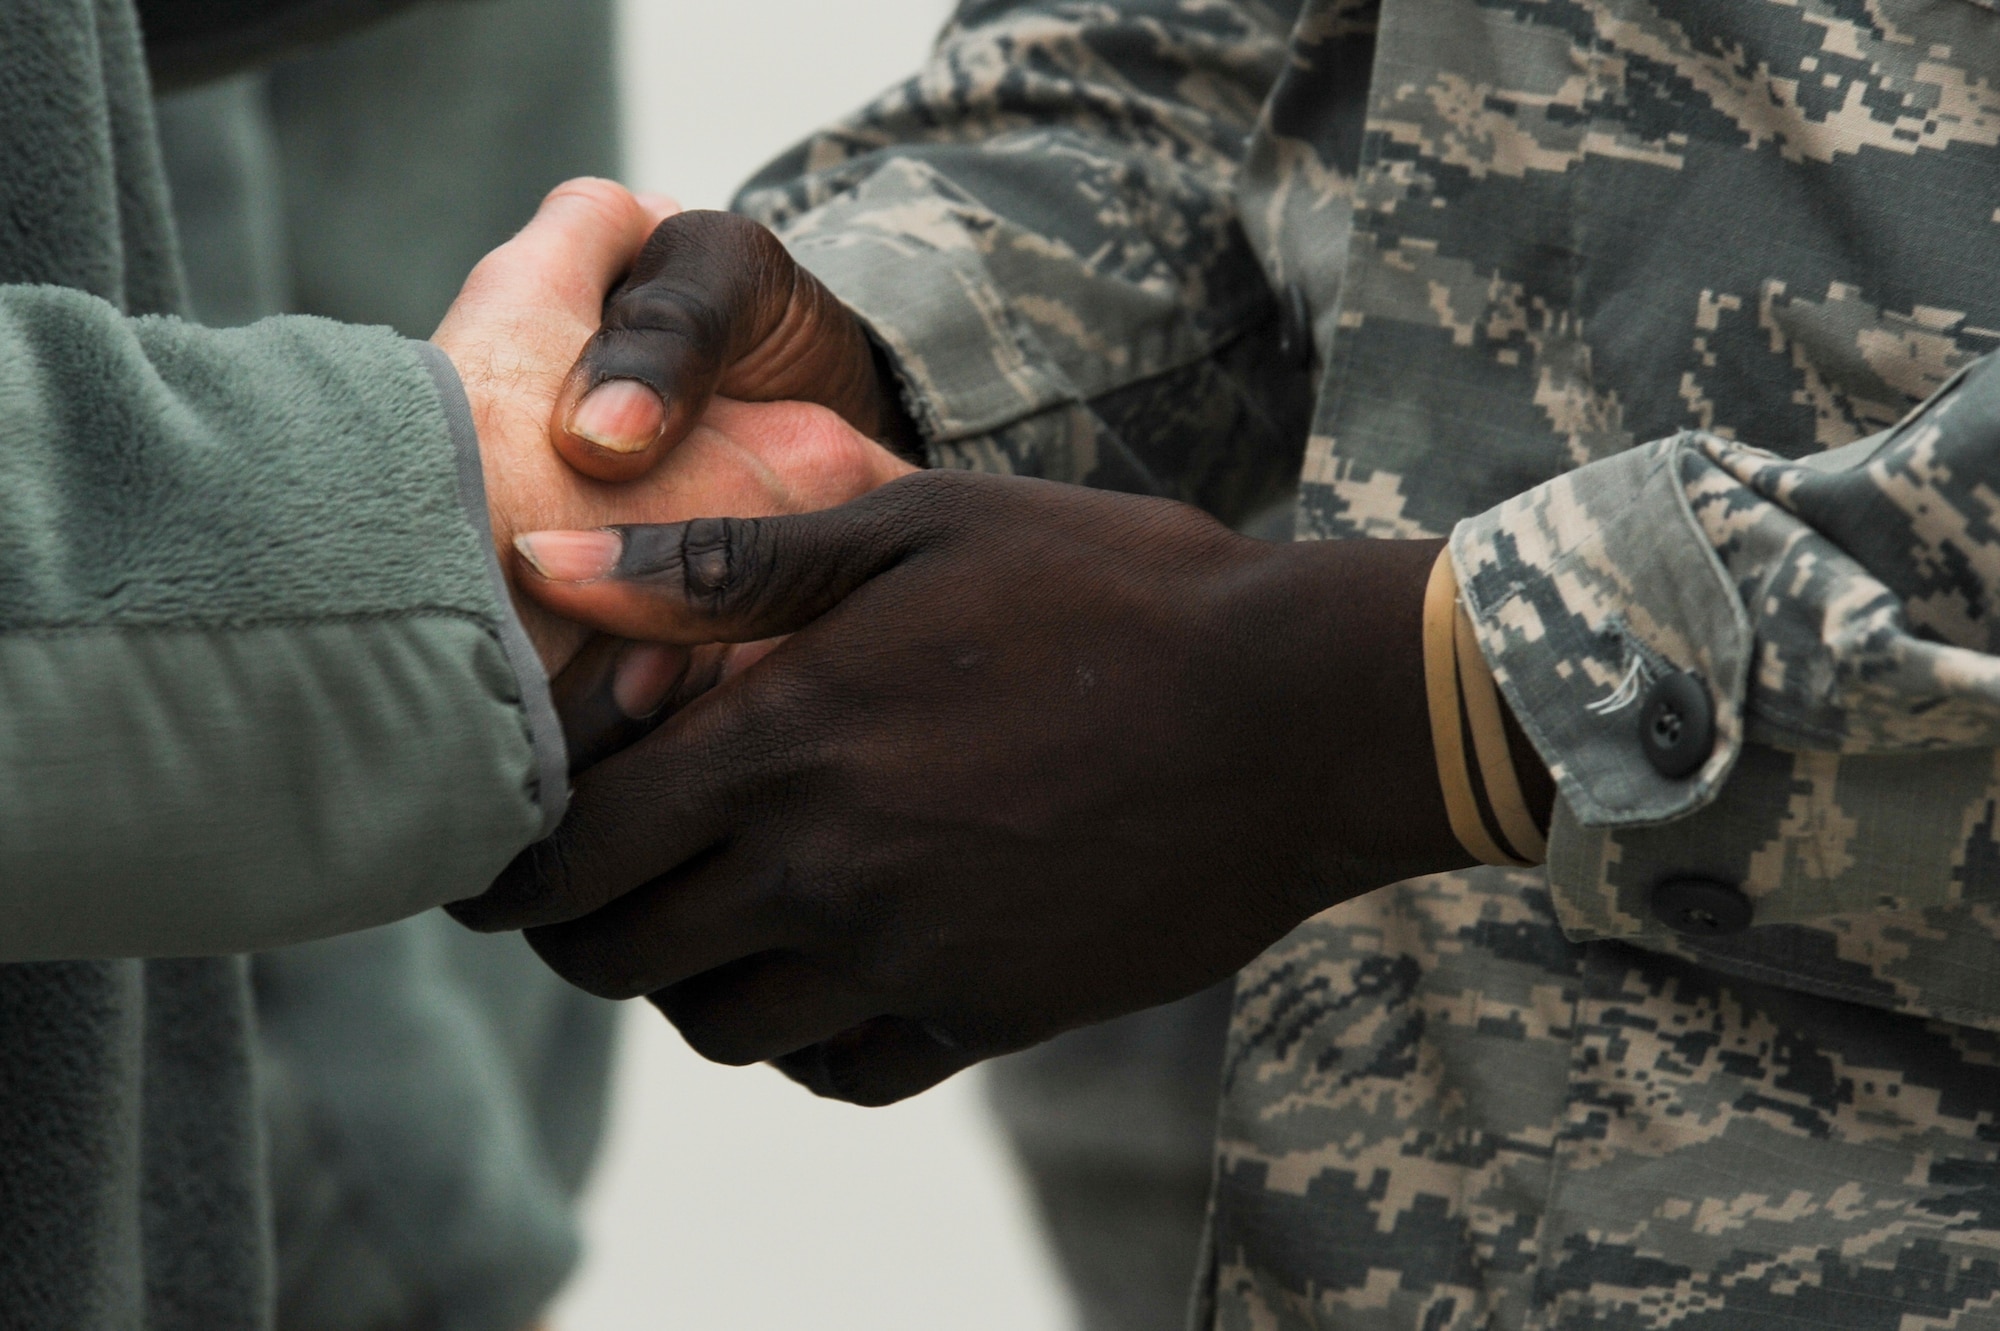 Chief Master Sgt. Edwin Ludwigsen, 52nd Fighter Wing command chief, left, shakes the hand of an Airman assigned to the 480th Expeditionary Fighter Squadron, right, during the squadron’s return to Spangdahlem Air Base, Germany, Oct. 12, 2016. Approximately 300 of the Airmen, who serve in flight, maintenance or support roles for the F-16 Fighting Falcon fighter aircraft, completed a six-month deployment to Southwest Asia by providing close air support and dynamic targeting operations as part of the squadron’s first deployment in support of Operation Inherent Resolve. Operation Inherent Resolve aims to eliminate the Da'esh terrorist group and the threat they pose to Iraq, Syria and the wider international community. (U.S. Air Force photo by Staff Sgt. Joe W. McFadden)